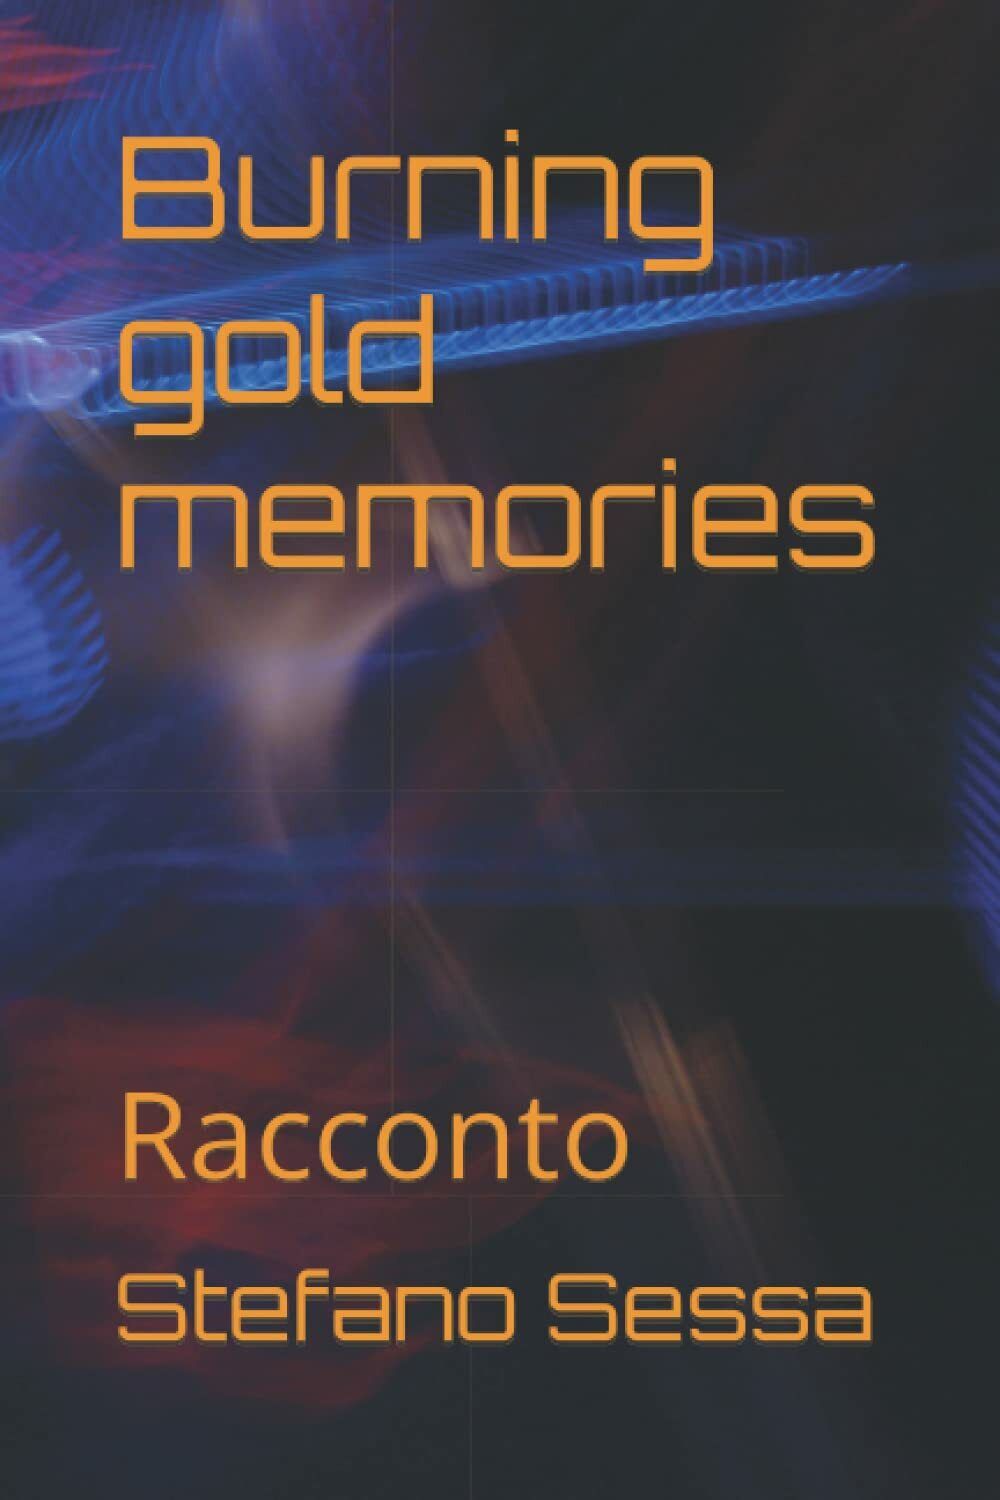 Burning gold memories: Racconto di Stefano Sessa,  2022,  Indipendently Publishe